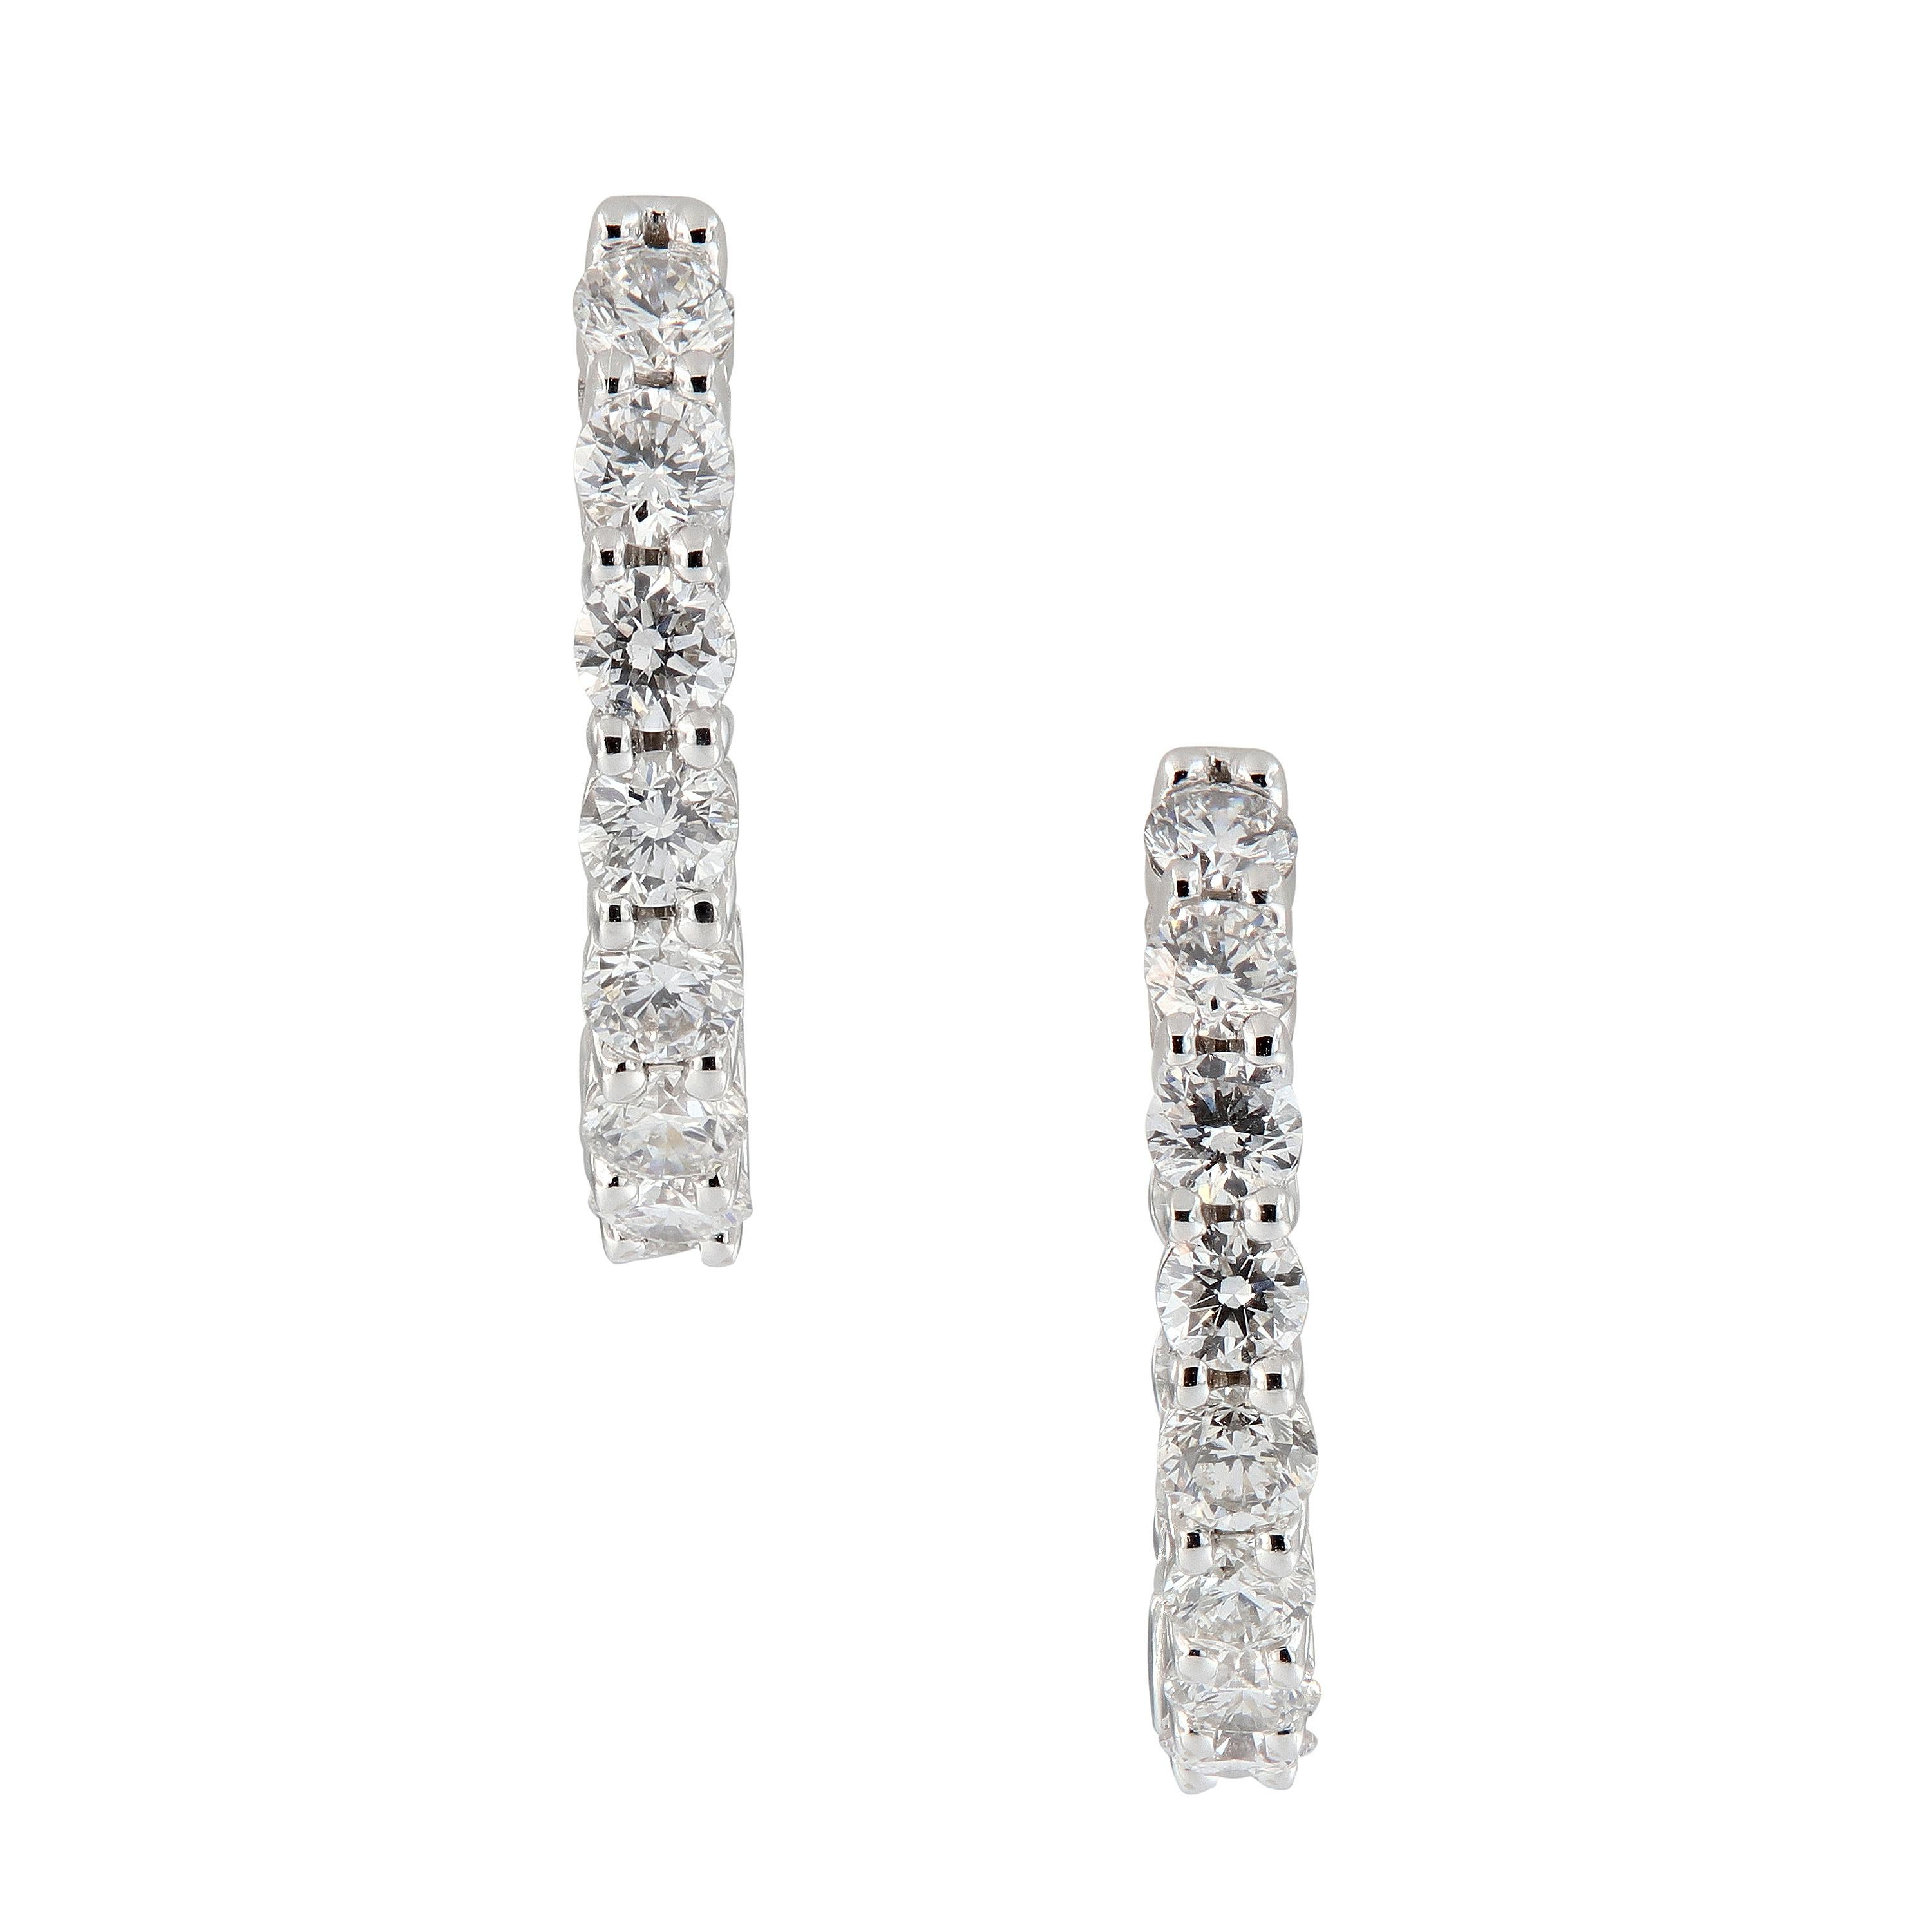 This sparkling pair of earrings features 1.50 carats of diamonds crafted in 18k white gold. Weigh 4.8 grams.

Diamonds 1.50 cttw, G-H